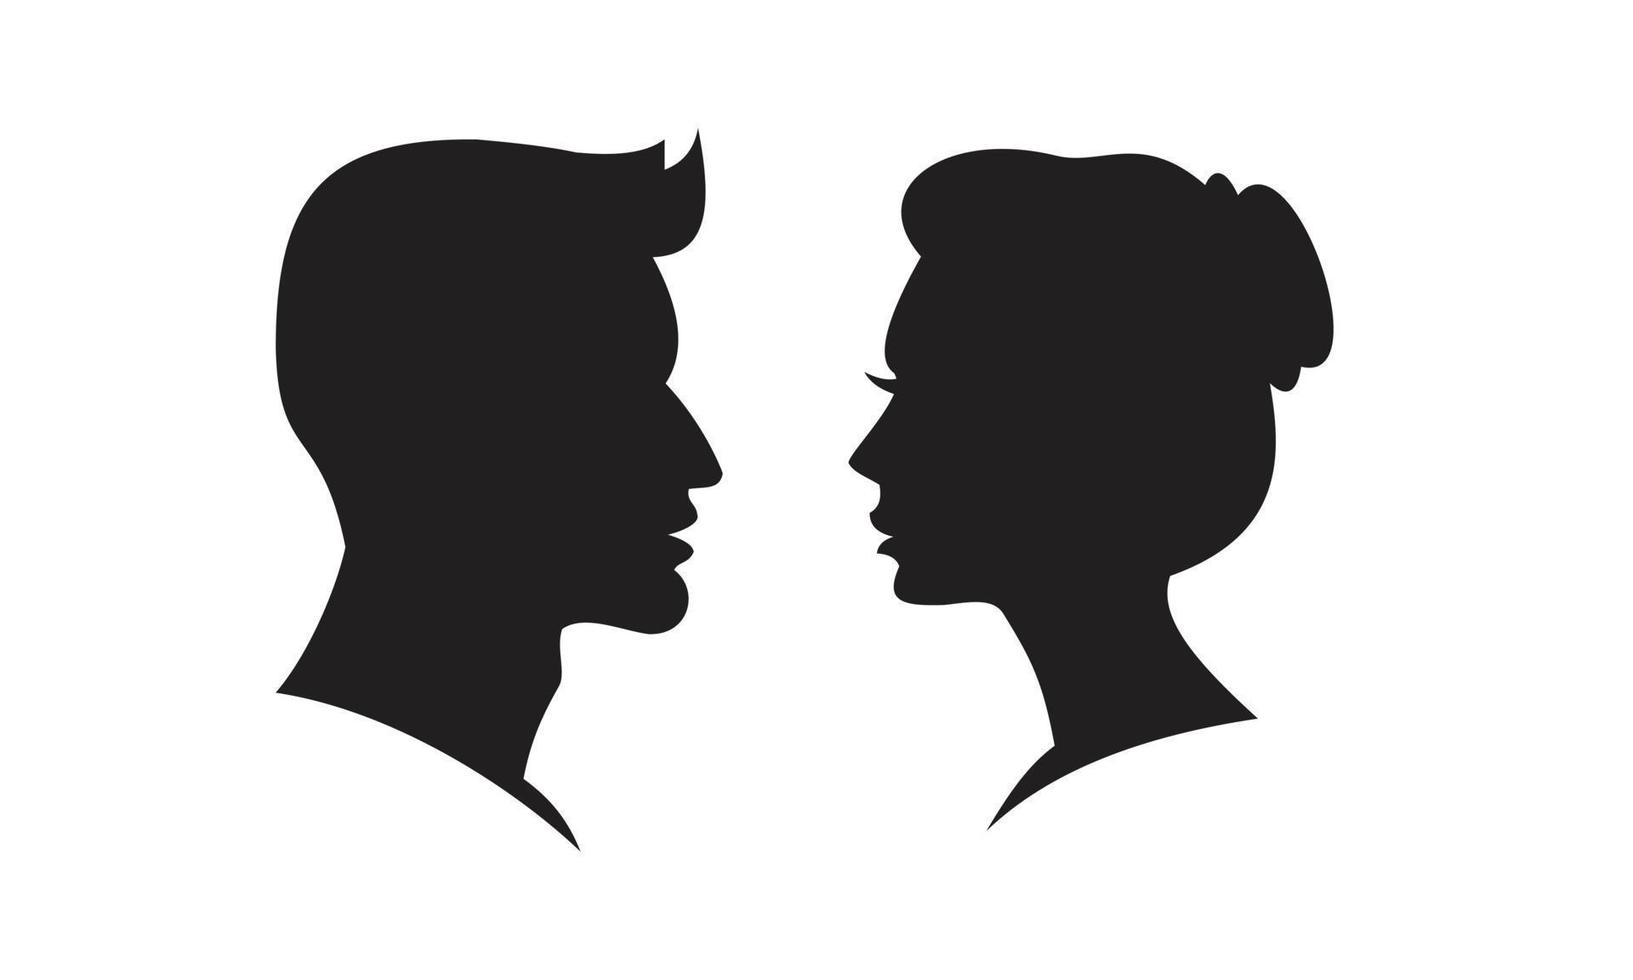 Man and Woman Silhouette face to face vector Icon template black color editable. Man and Woman Silhouette face to face vector Icon symbol Flat vector illustration for graphic and web design.